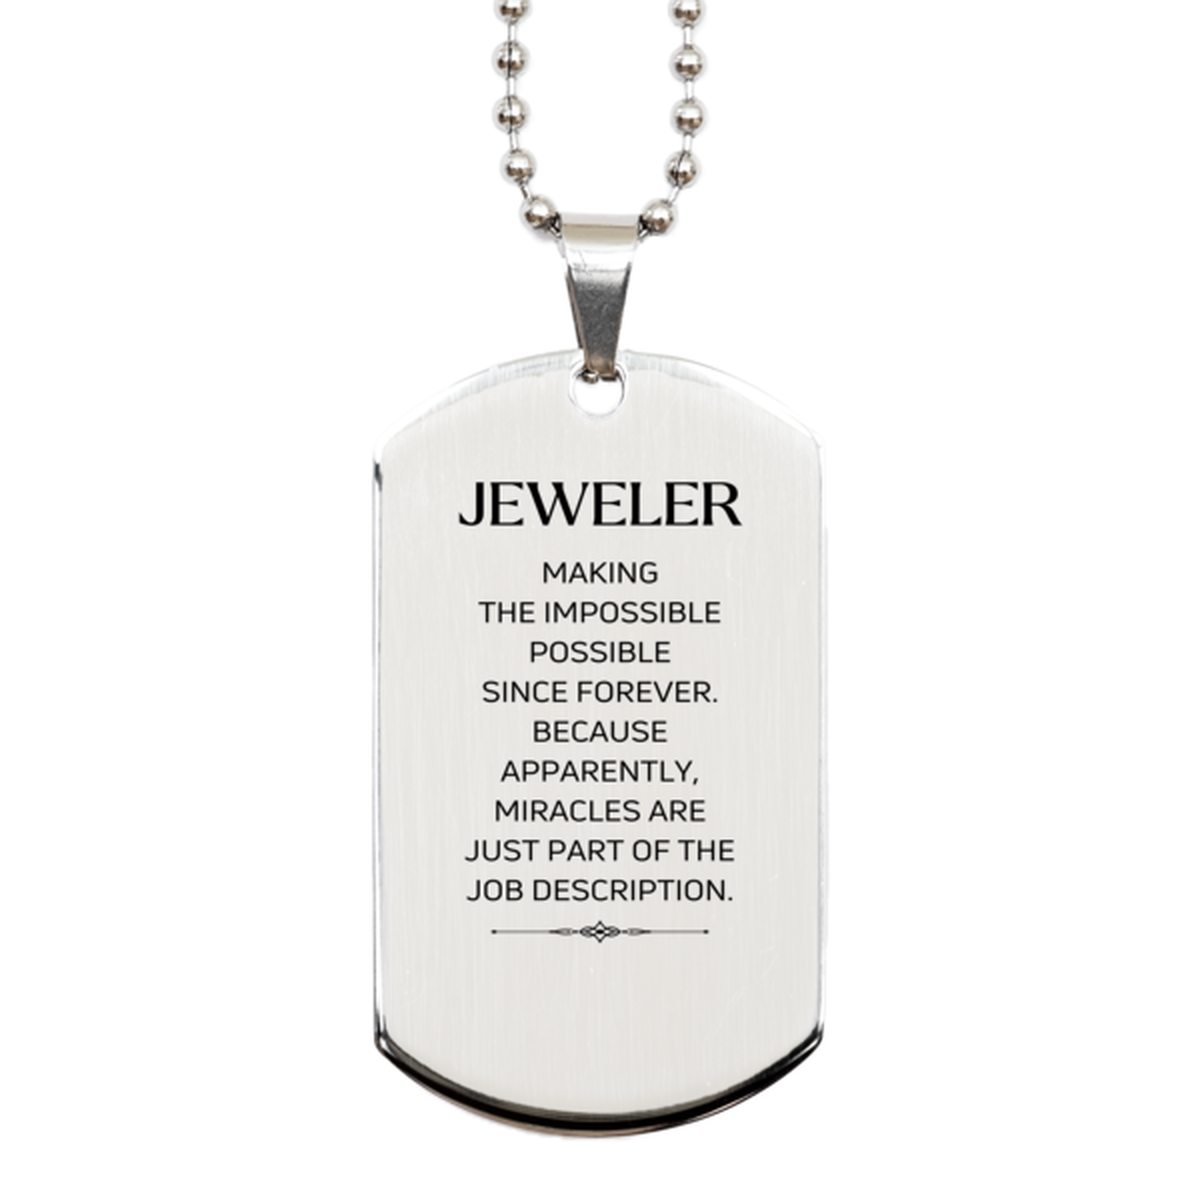 Funny Jeweler Gifts, Miracles are just part of the job description, Inspirational Birthday Silver Dog Tag For Jeweler, Men, Women, Coworkers, Friends, Boss